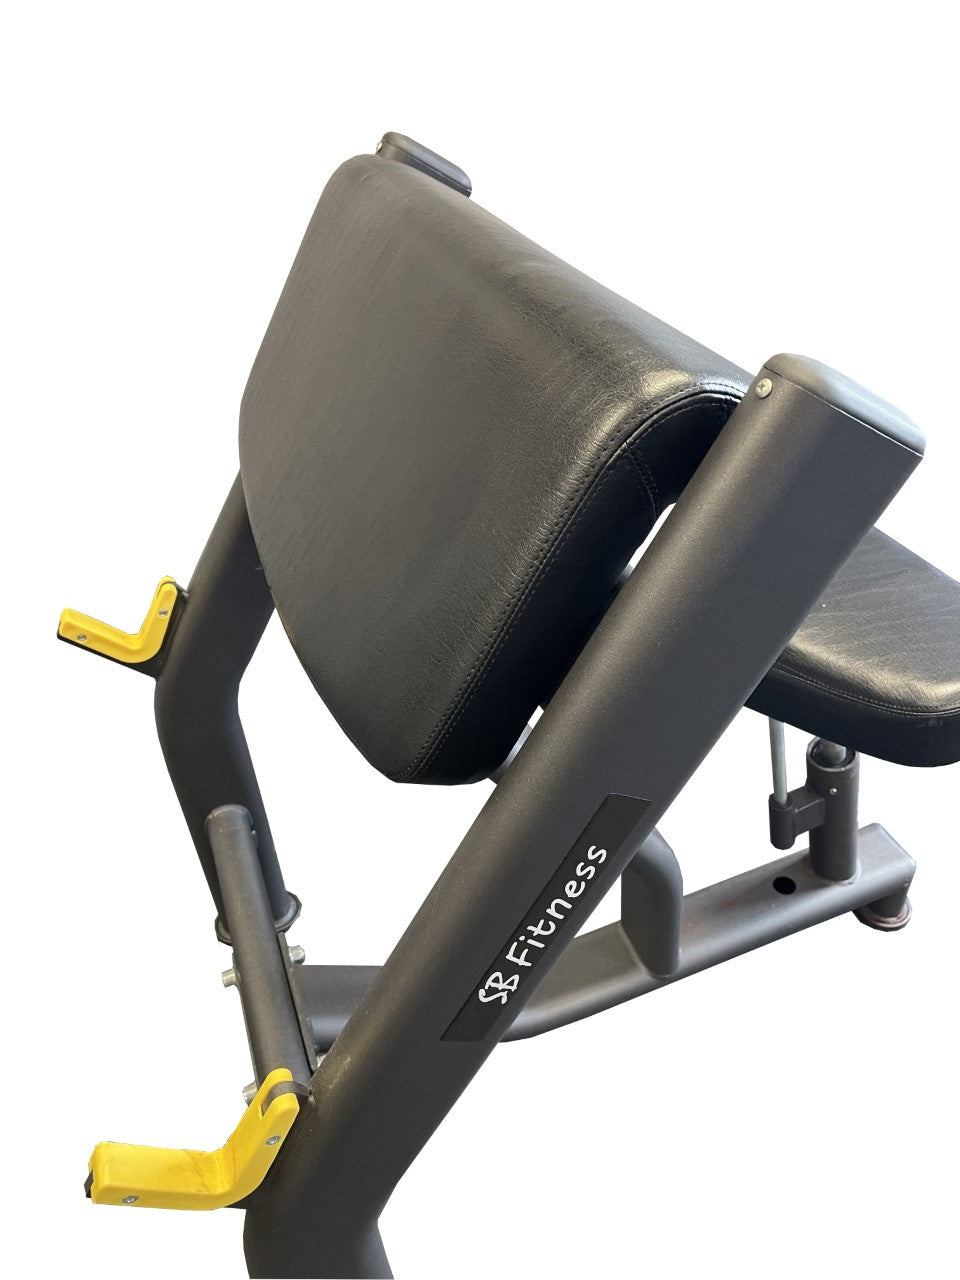 SB Fitness Commercial Preacher Curl Bench